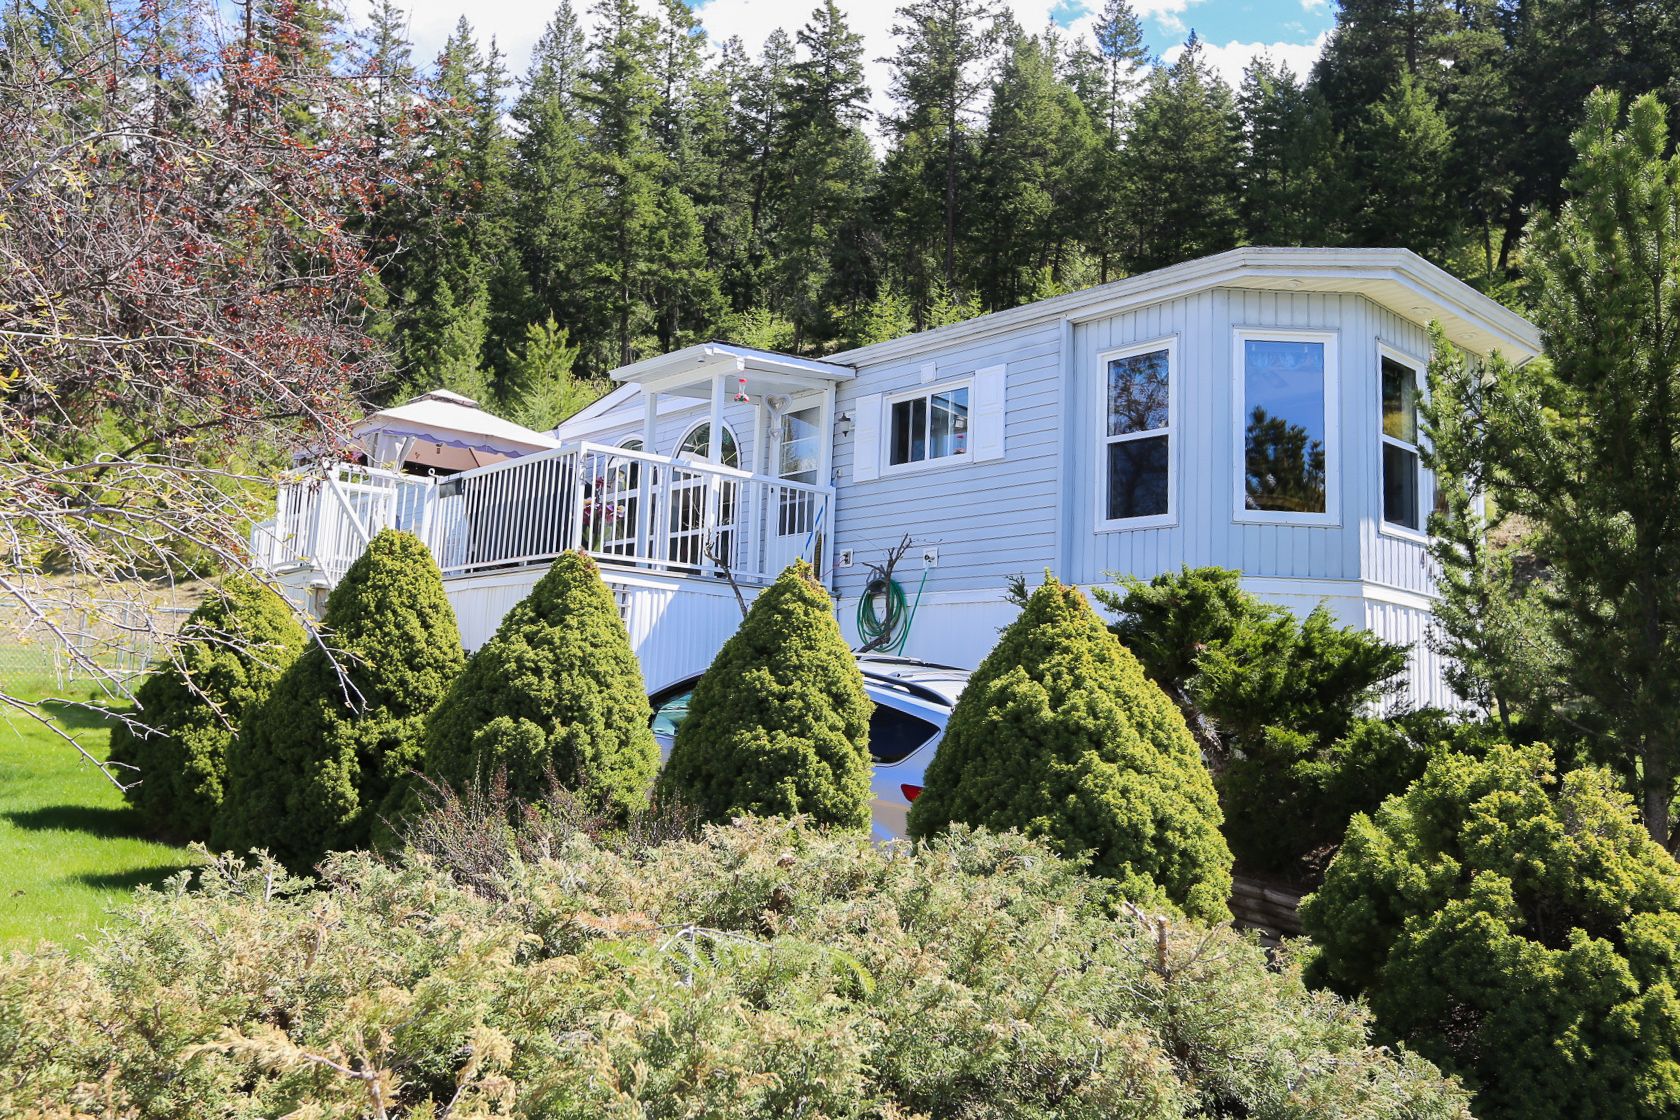 Main Photo: 44 4510 POWER Road in BARRIERE: N.E. Manufactured Home for sale ()  : MLS®# 156324